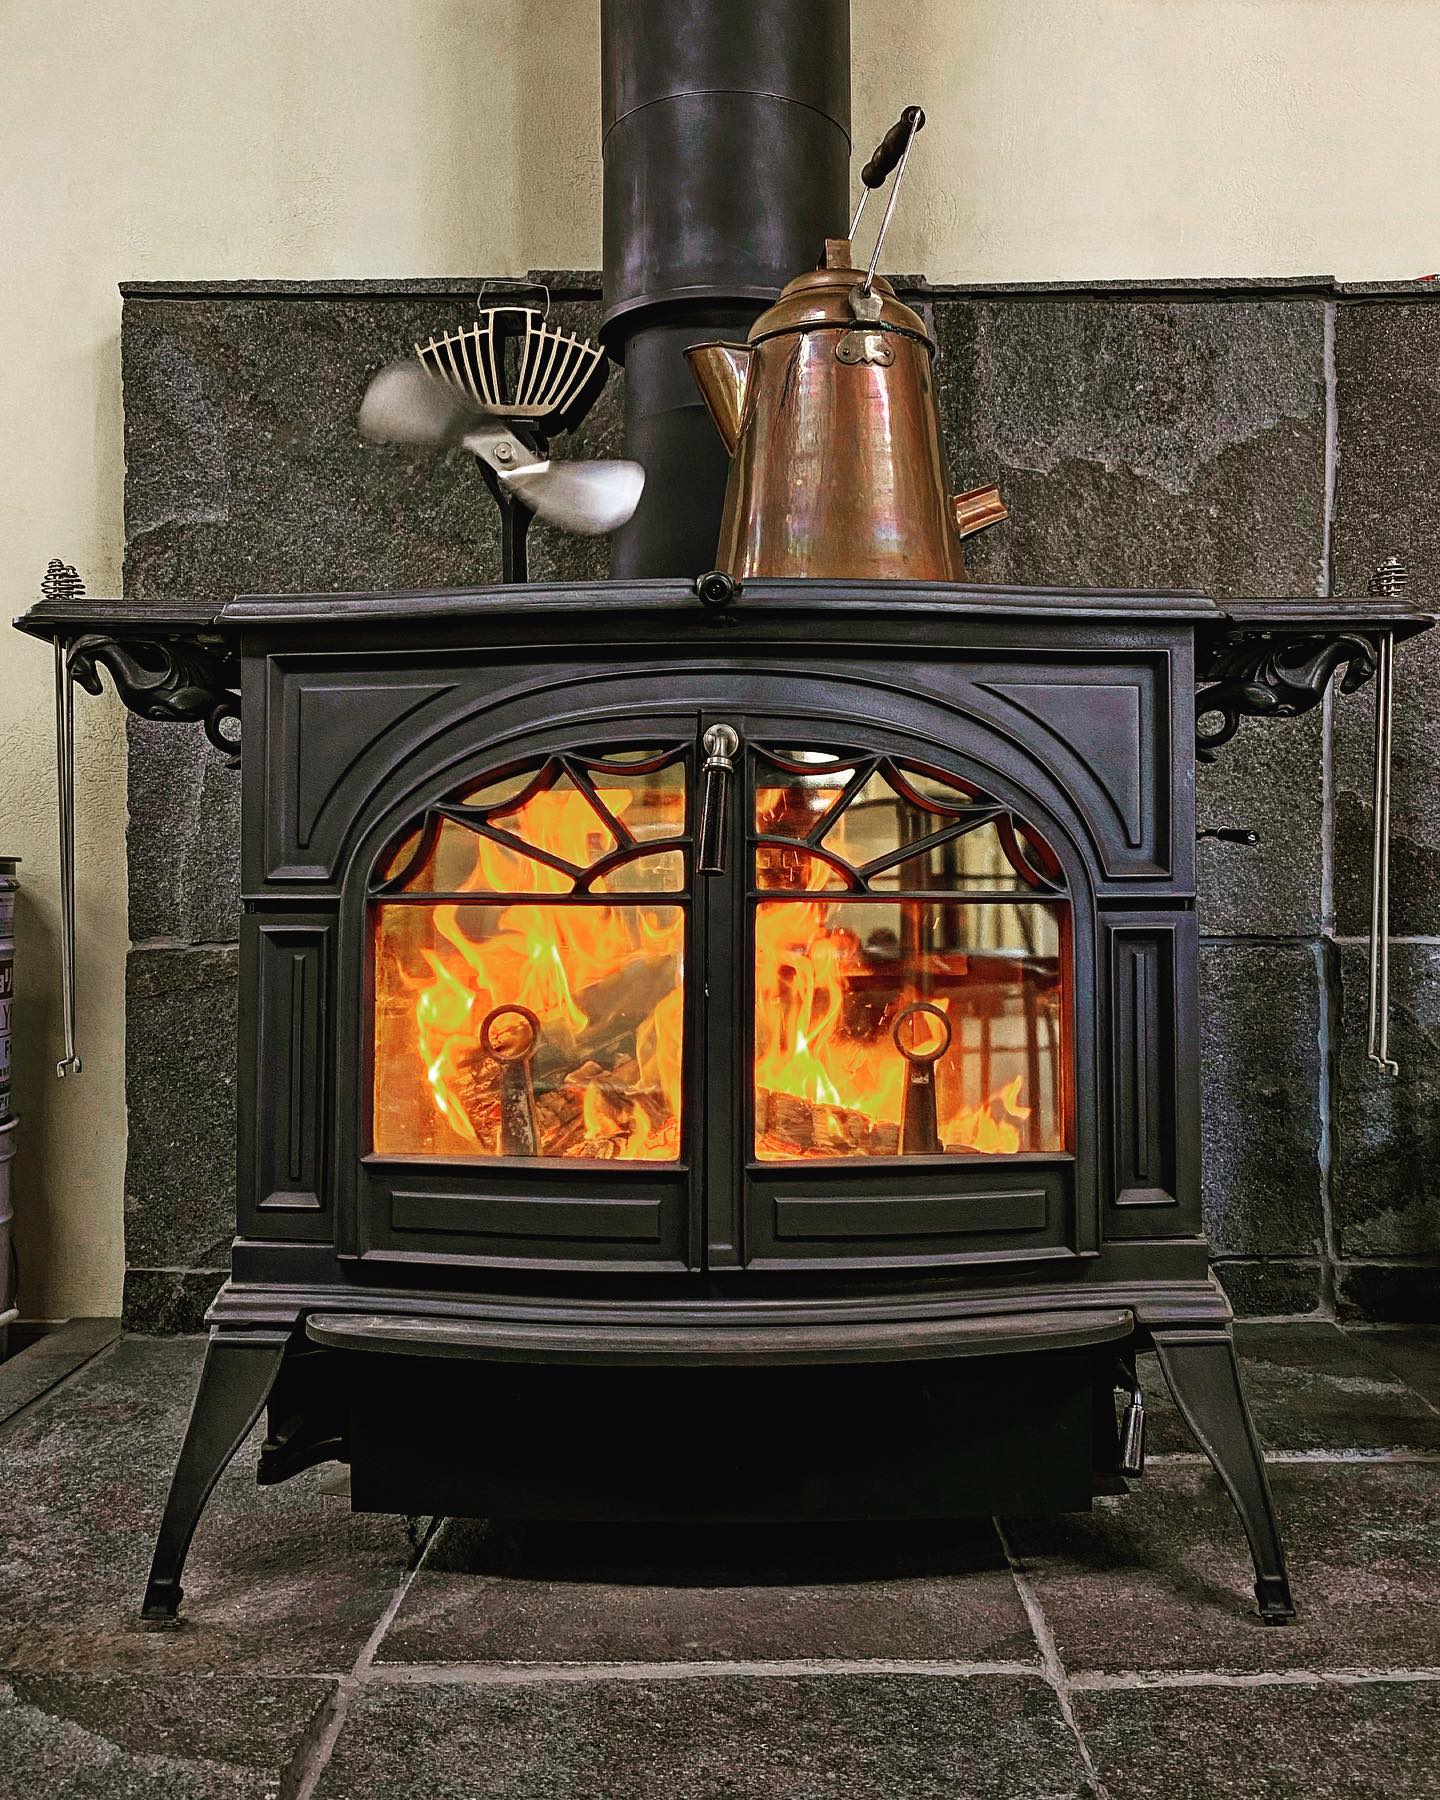 Vermont Castings Defiant Wood-Burning Stove